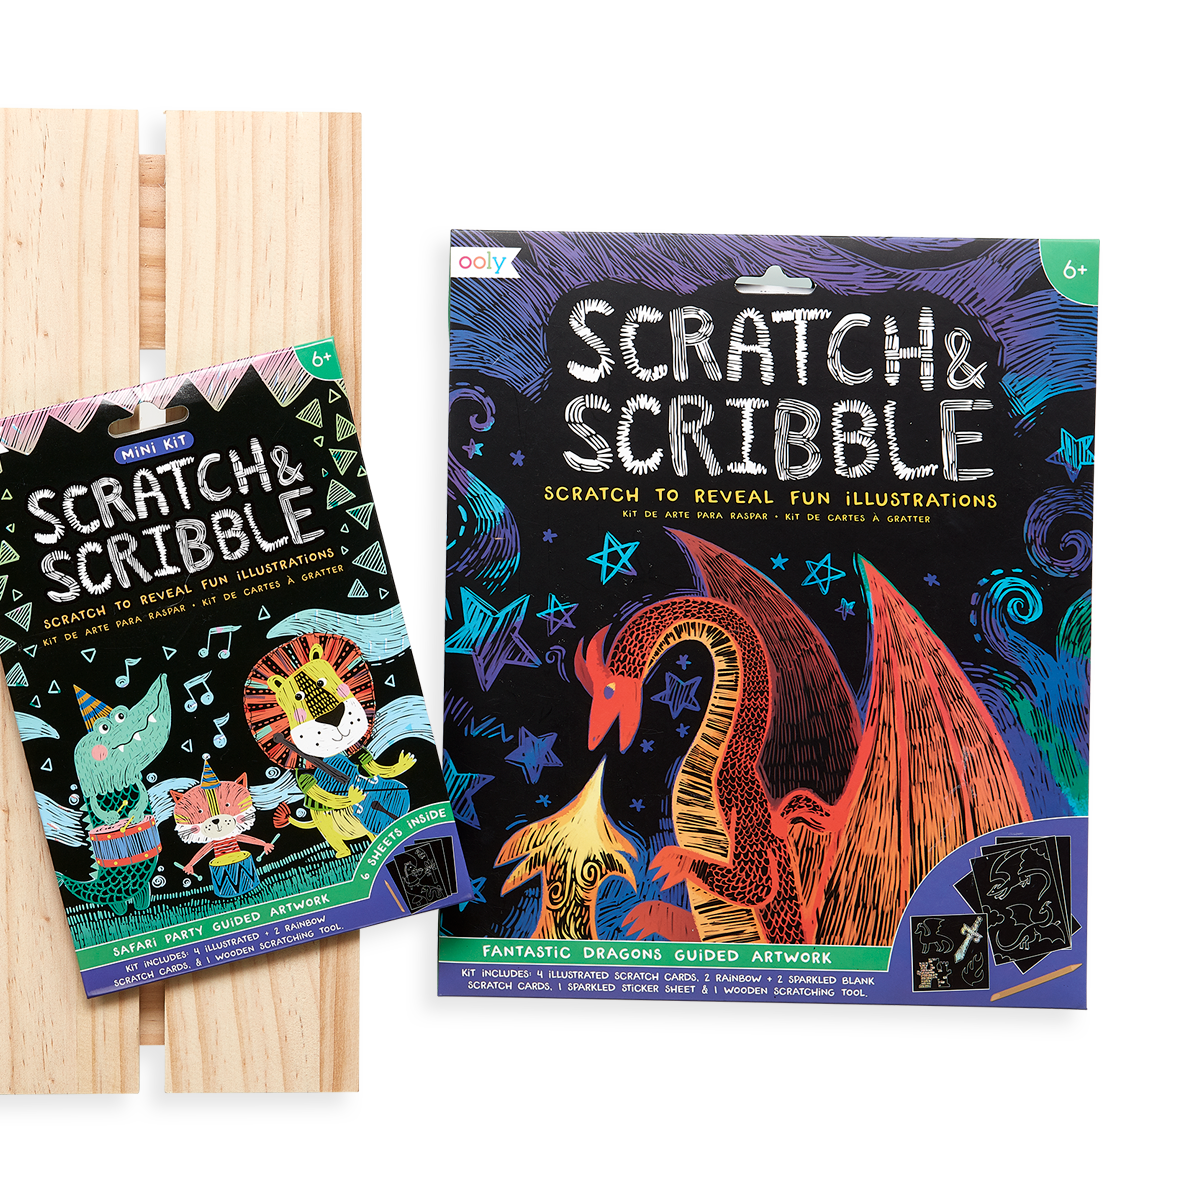 Display image of the OOLY Safari Party Scratch and Scribble Mini Scratch Art Kit next to the original Fantastic Dragons Scratch and Scribble. 